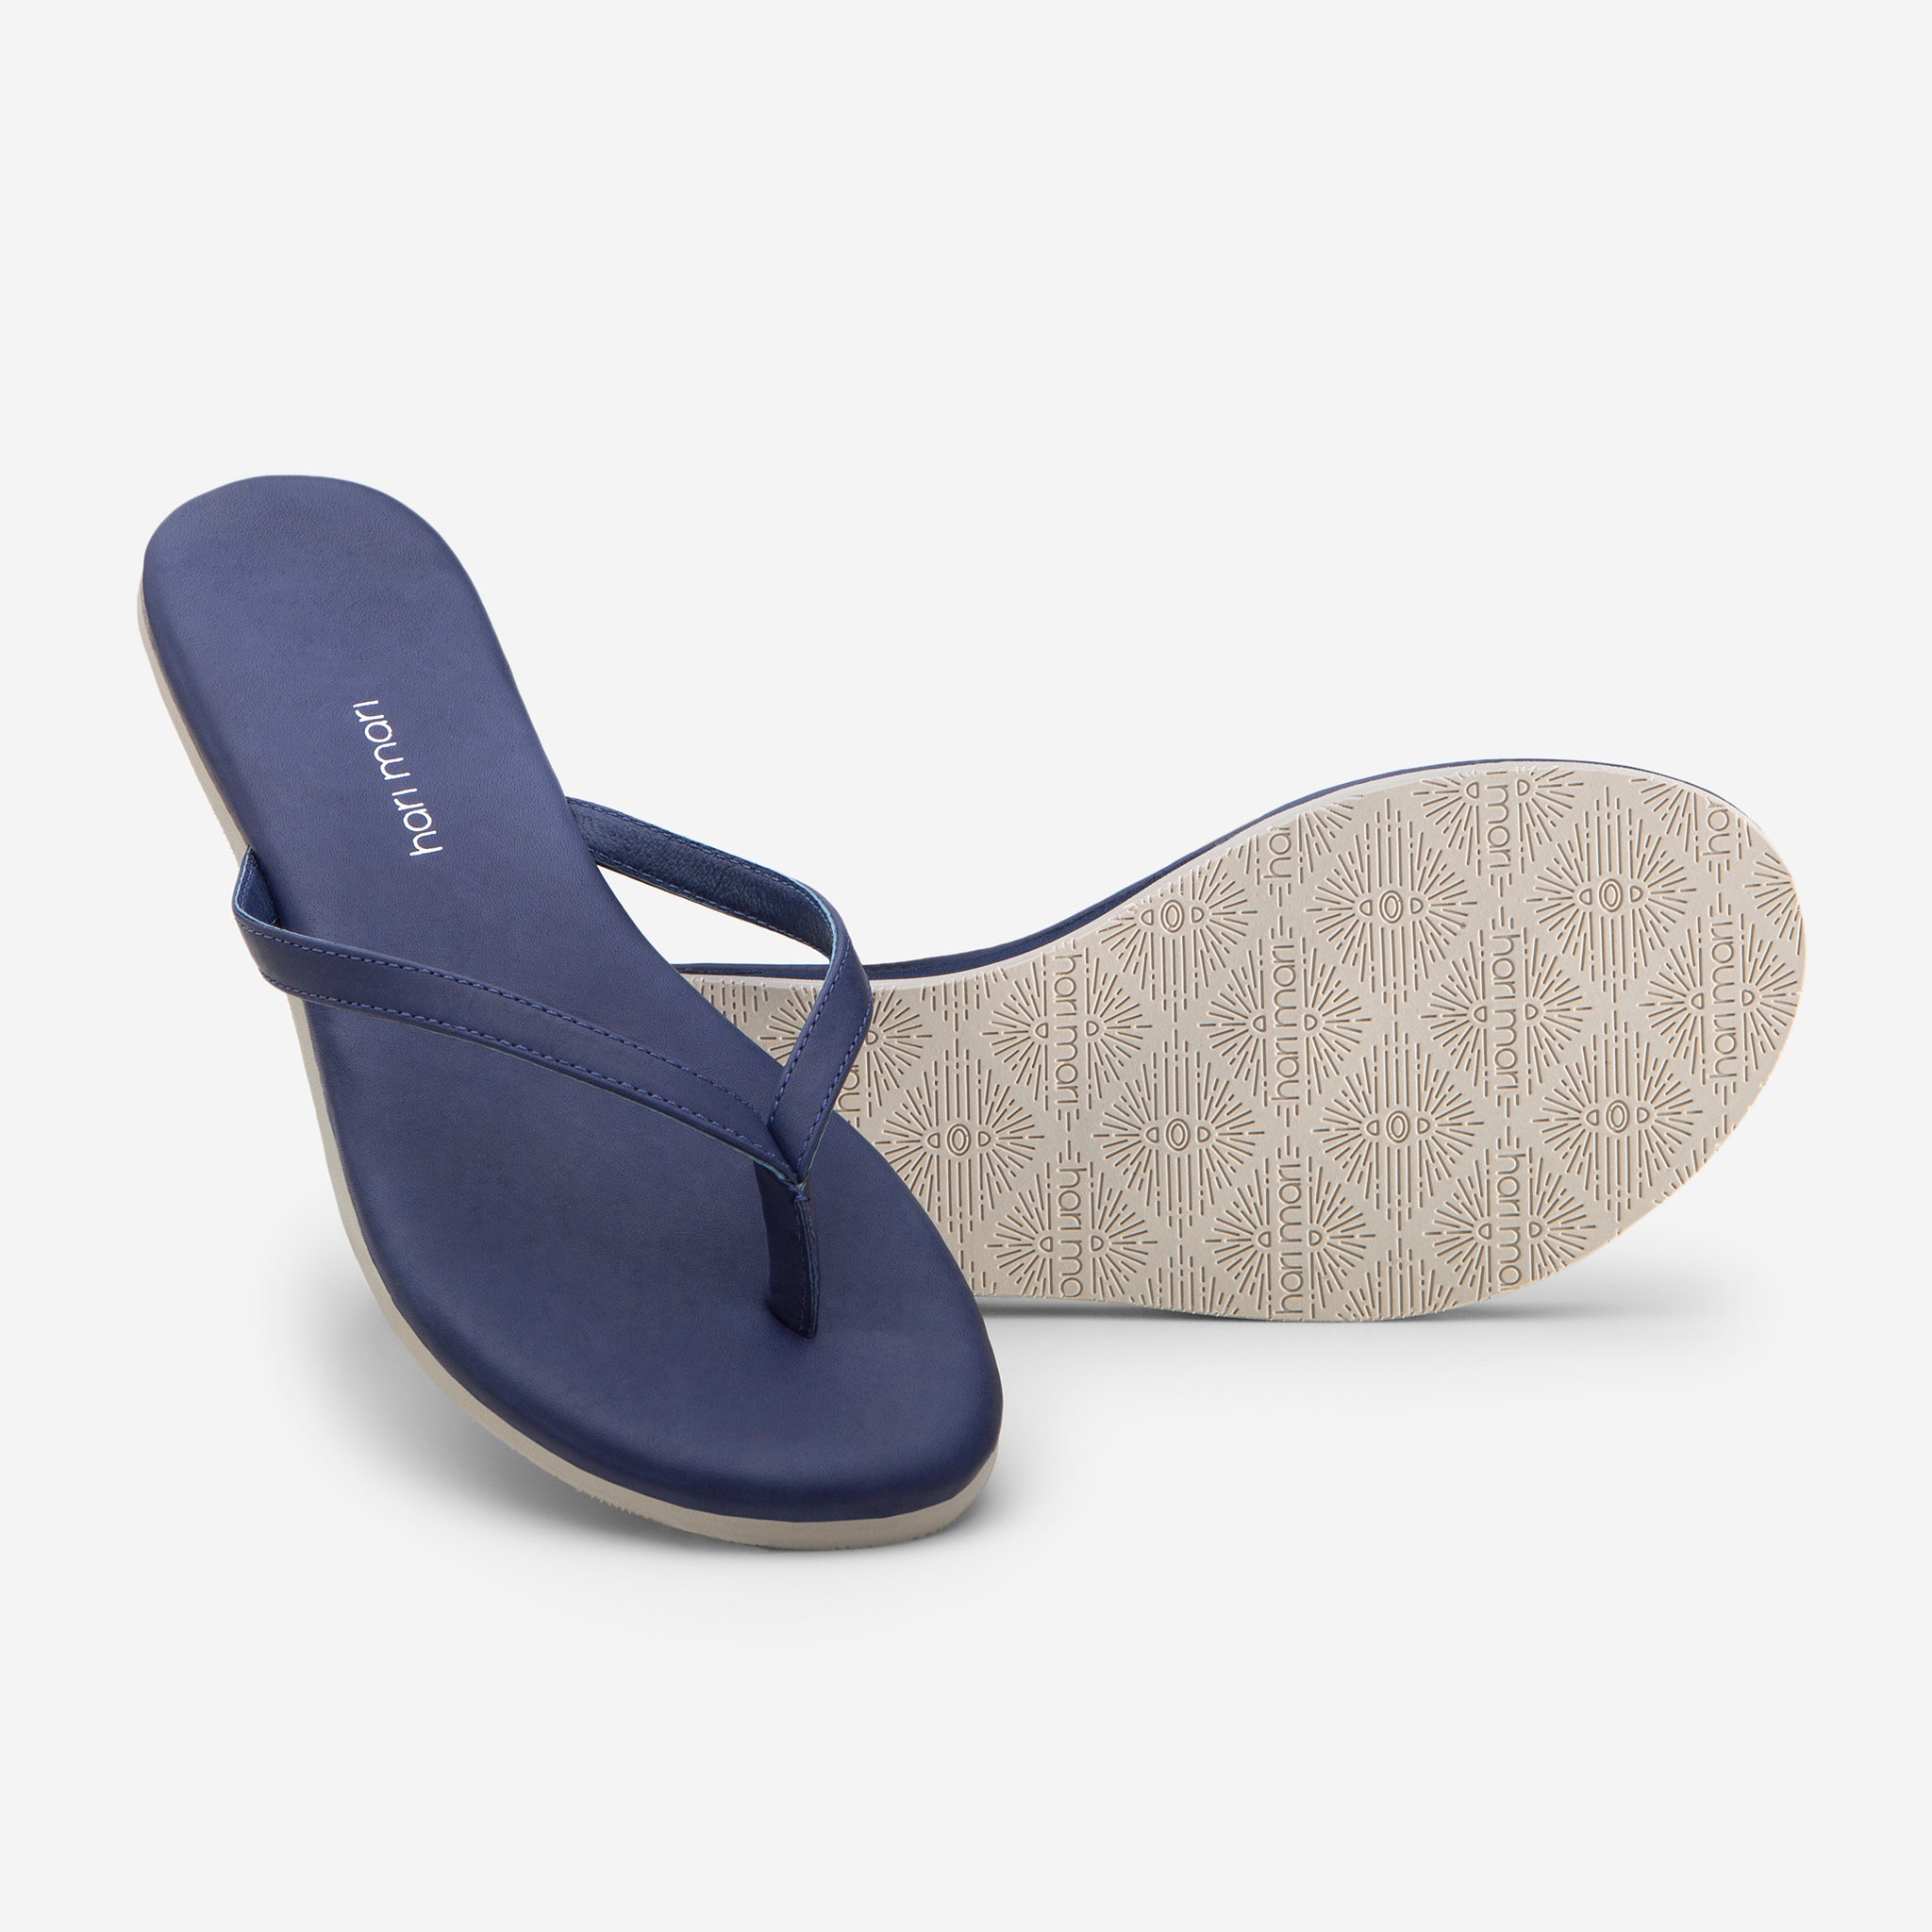 Hari Mari Women's The Mari Flip Flop in Navy on white background showing flip flop and bottom of flip flop rubber outsole